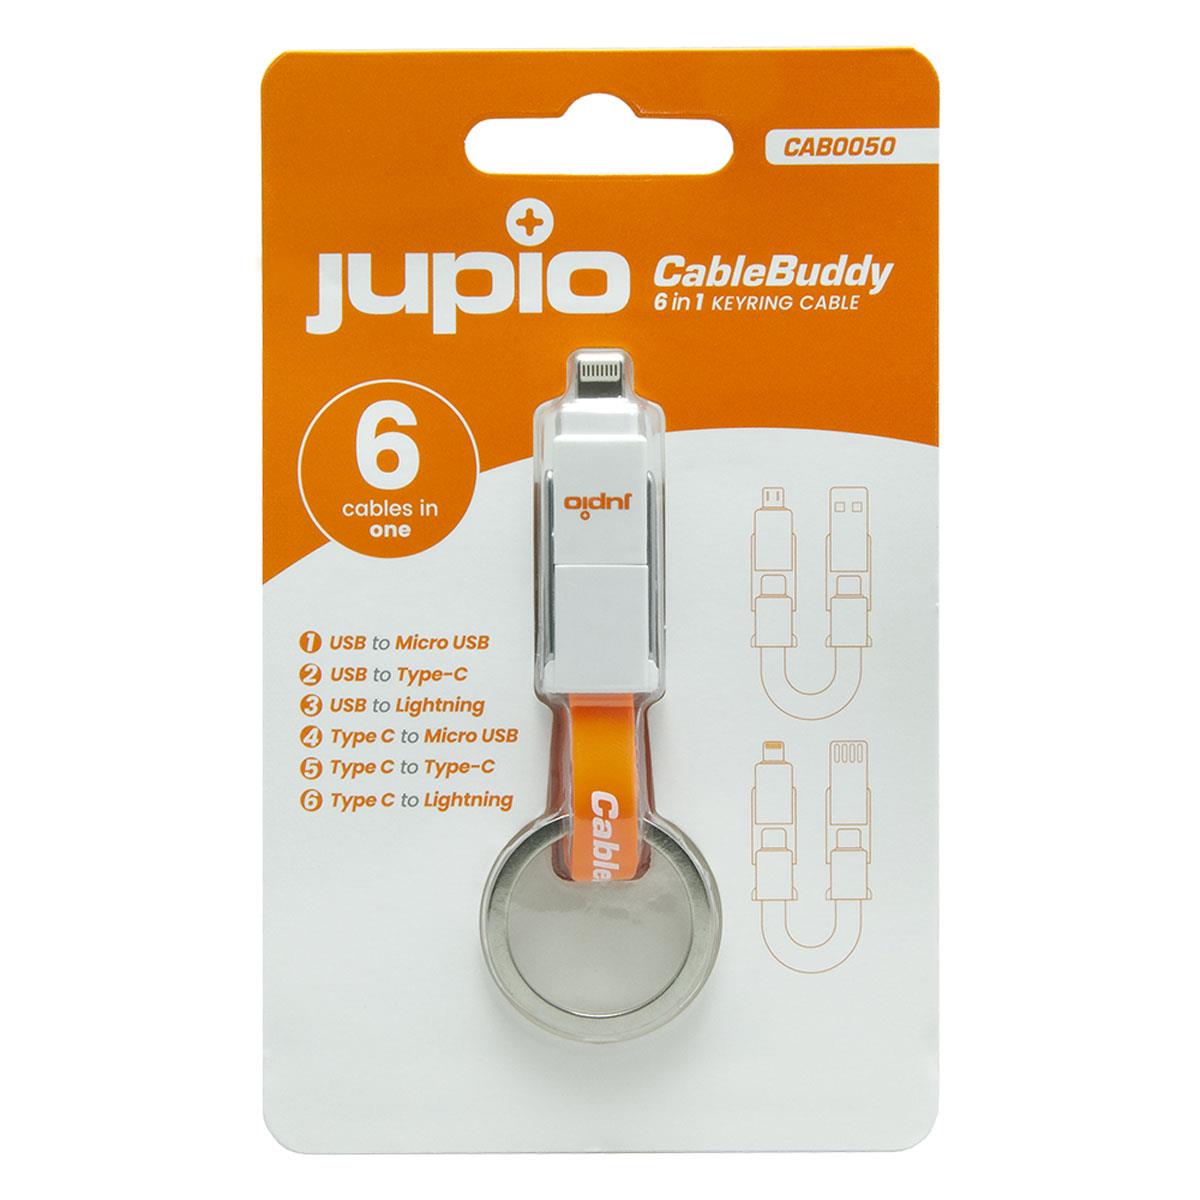 Jupio CableBuddy 6-in-1 Keyring Cable